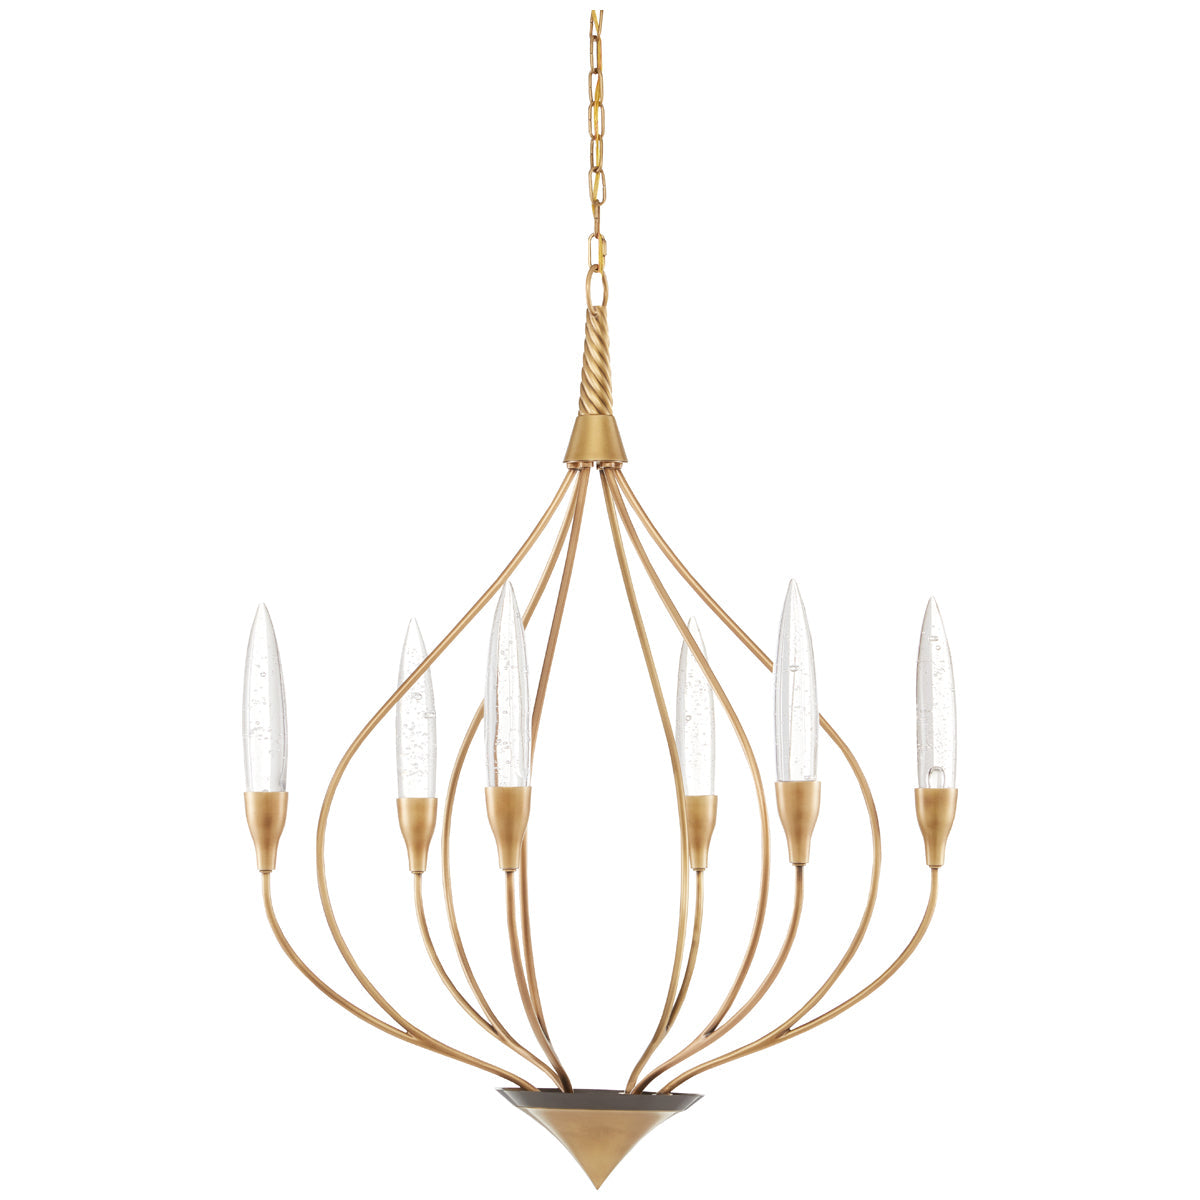 Currey and Company Ischia Chandelier